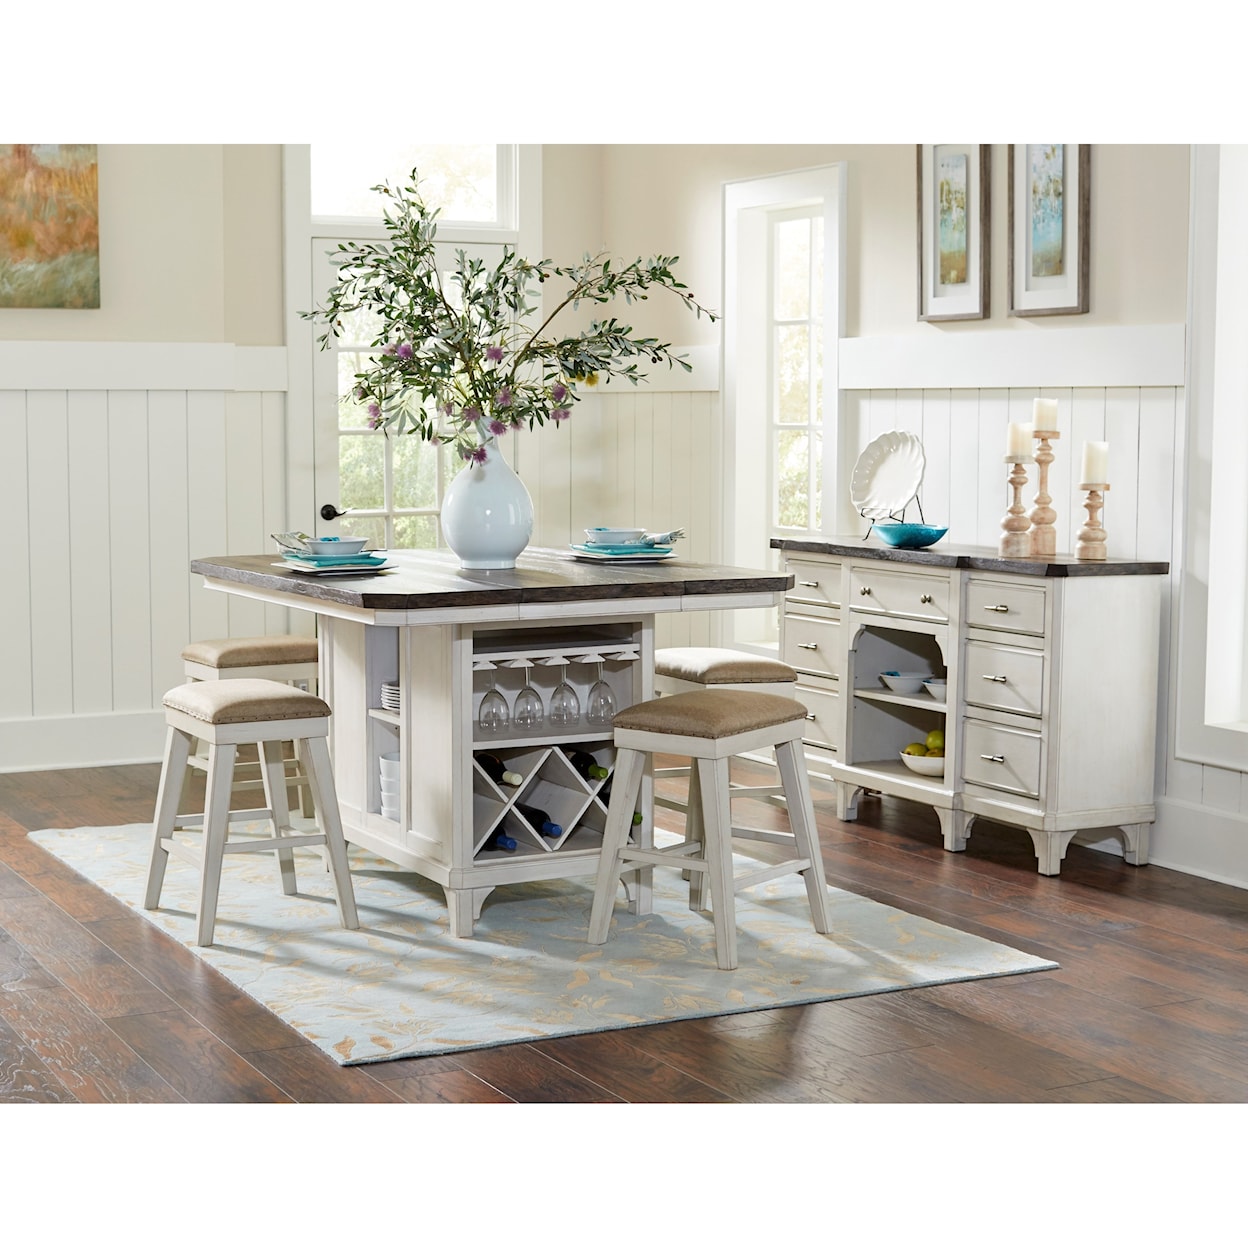 Avalon Furniture Mystic Cay Barstool with Upholstered Seat